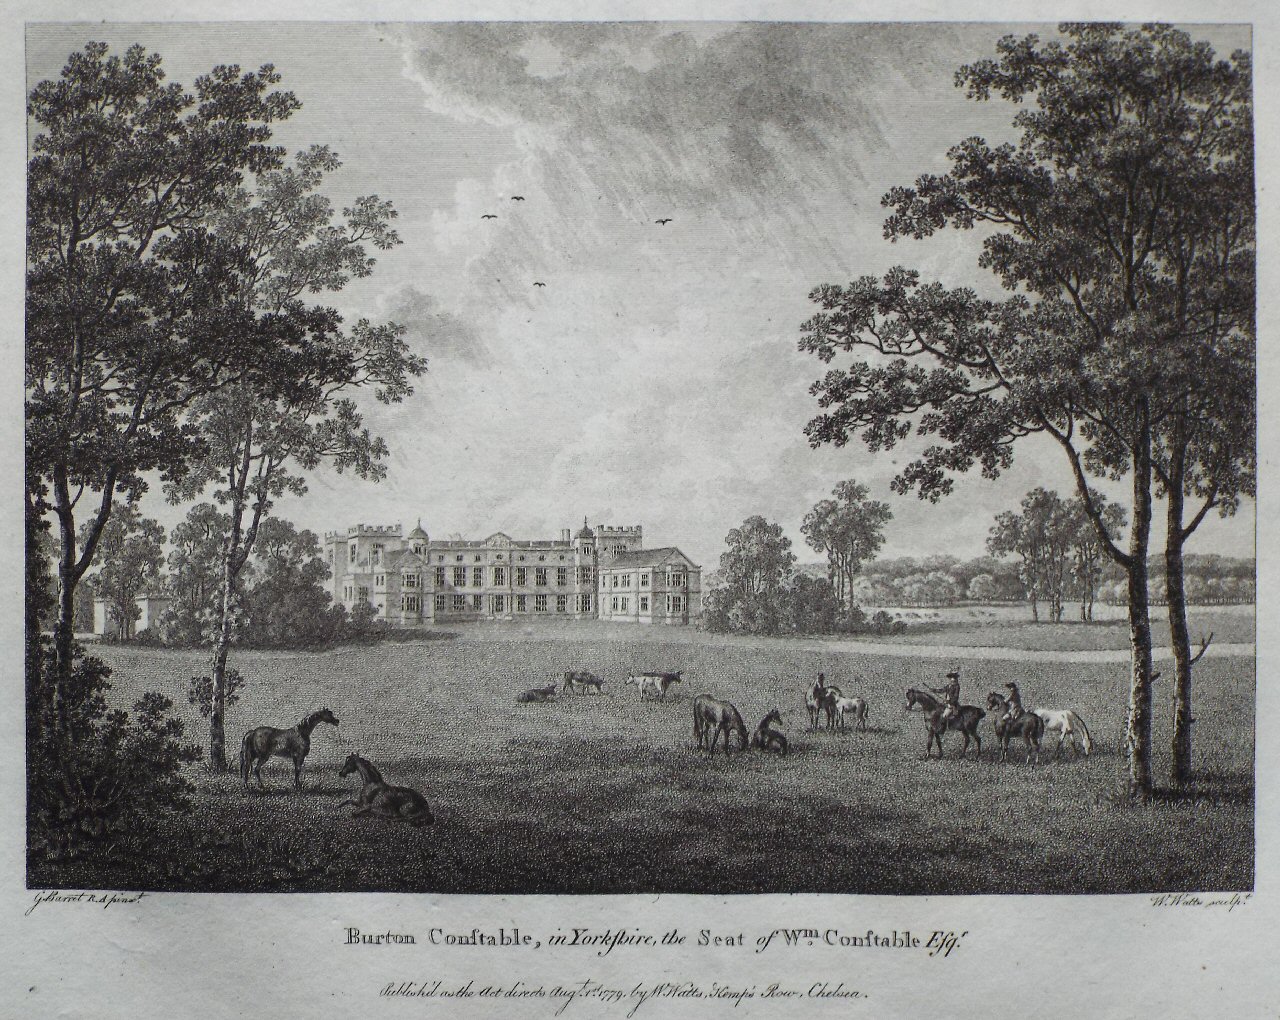 Print - Burton Constable, in Yorkshire, the Seat of Wm Constable Esqr - Watts